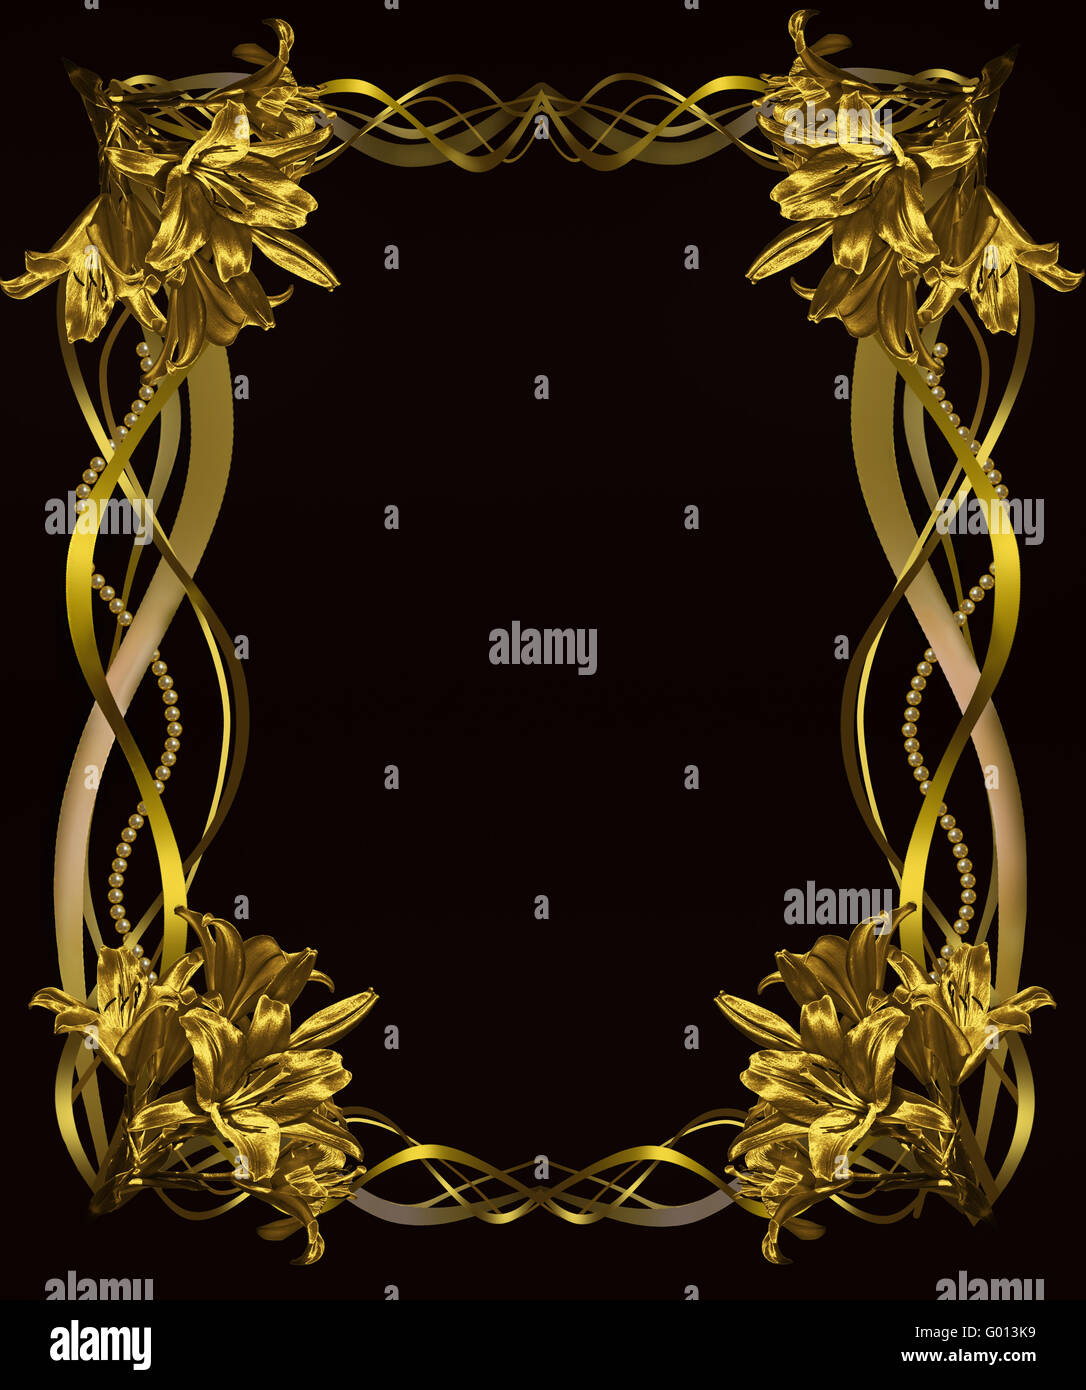 black background with frame of Golden lilies Stock Photo